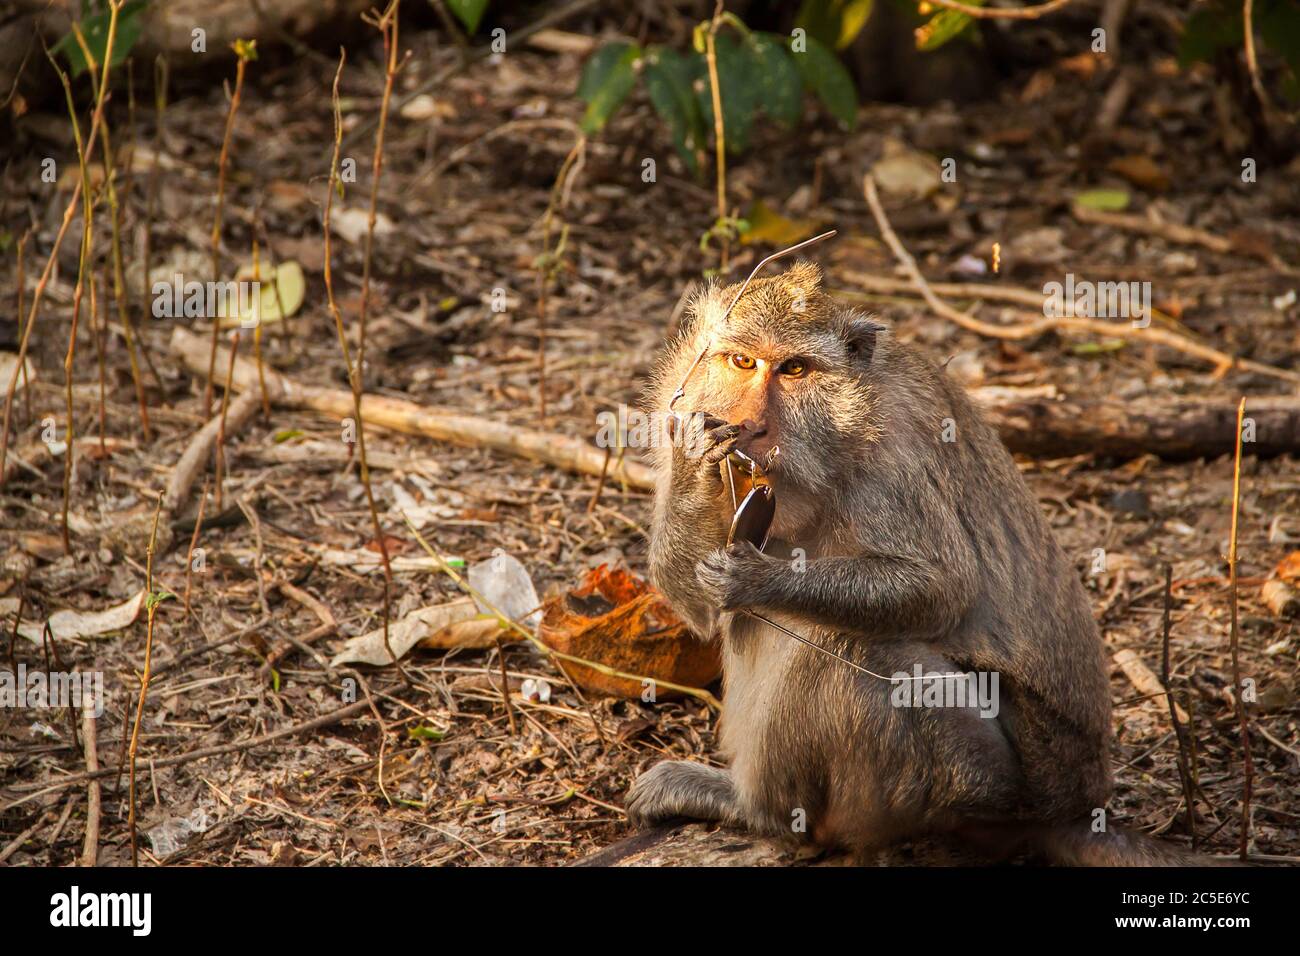 Thief monkey in Bali biting the sunglasses of a tourist Stock Photo